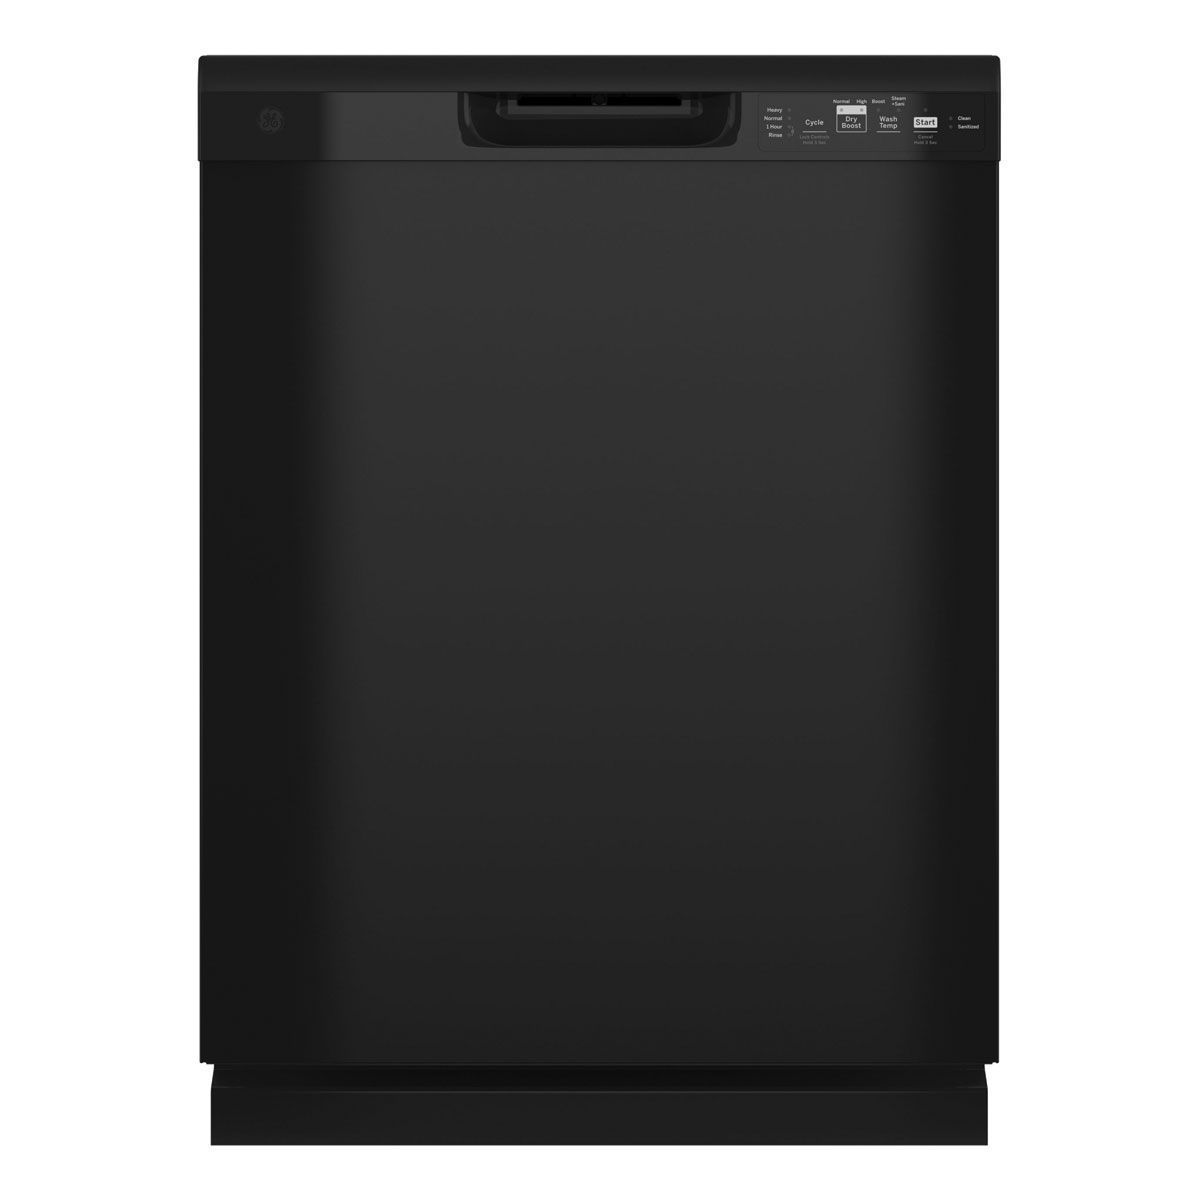 Picture of GE DISHWASHER